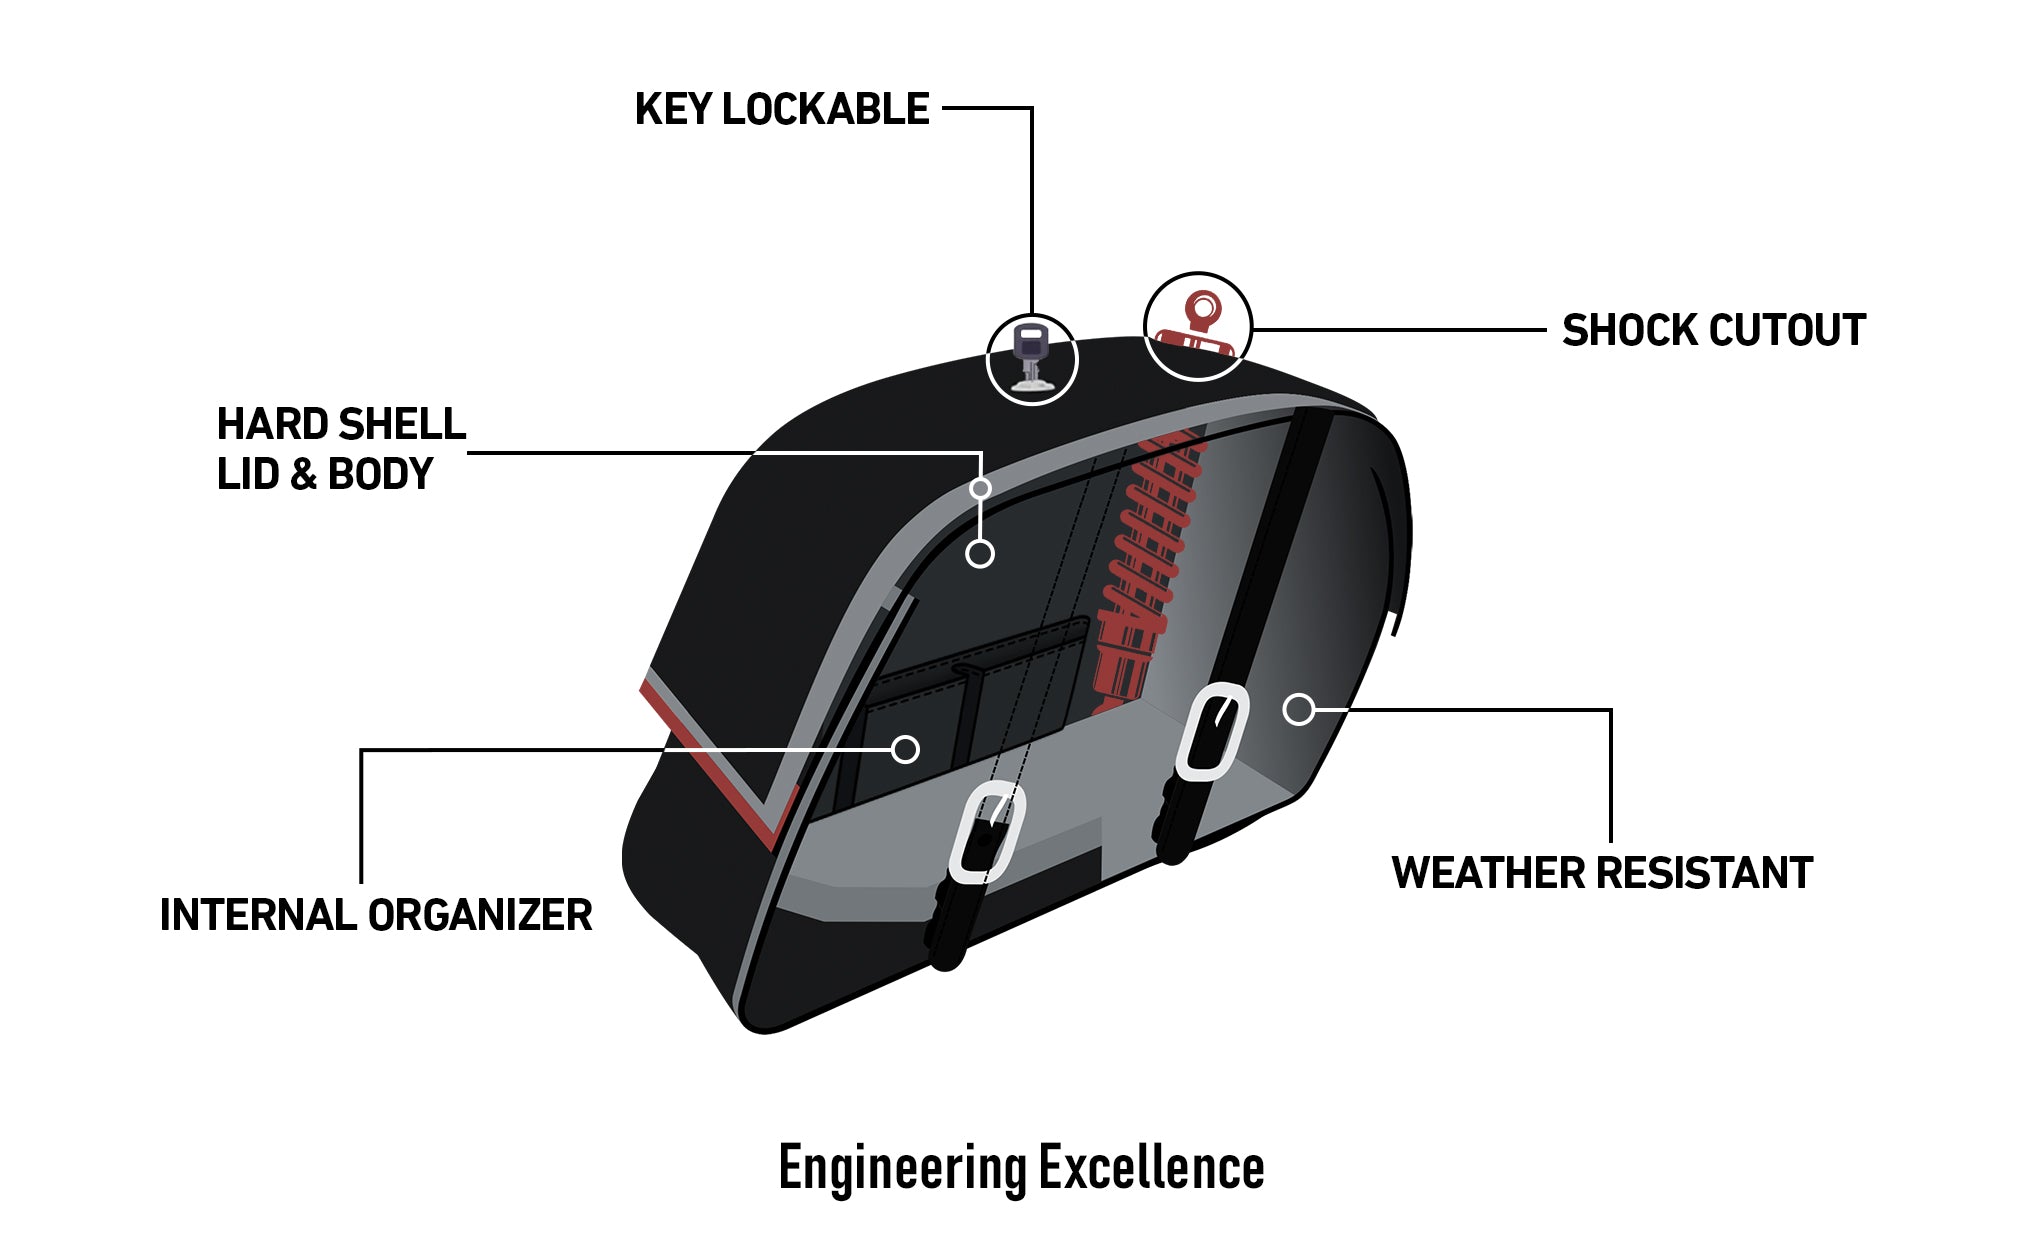 Viking Skarner Large Shock Cut Out Leather Motorcycle Saddlebags For Harley Dyna Wide Glide Fxdwg I Engineering Excellence with Bag on Bike @expand